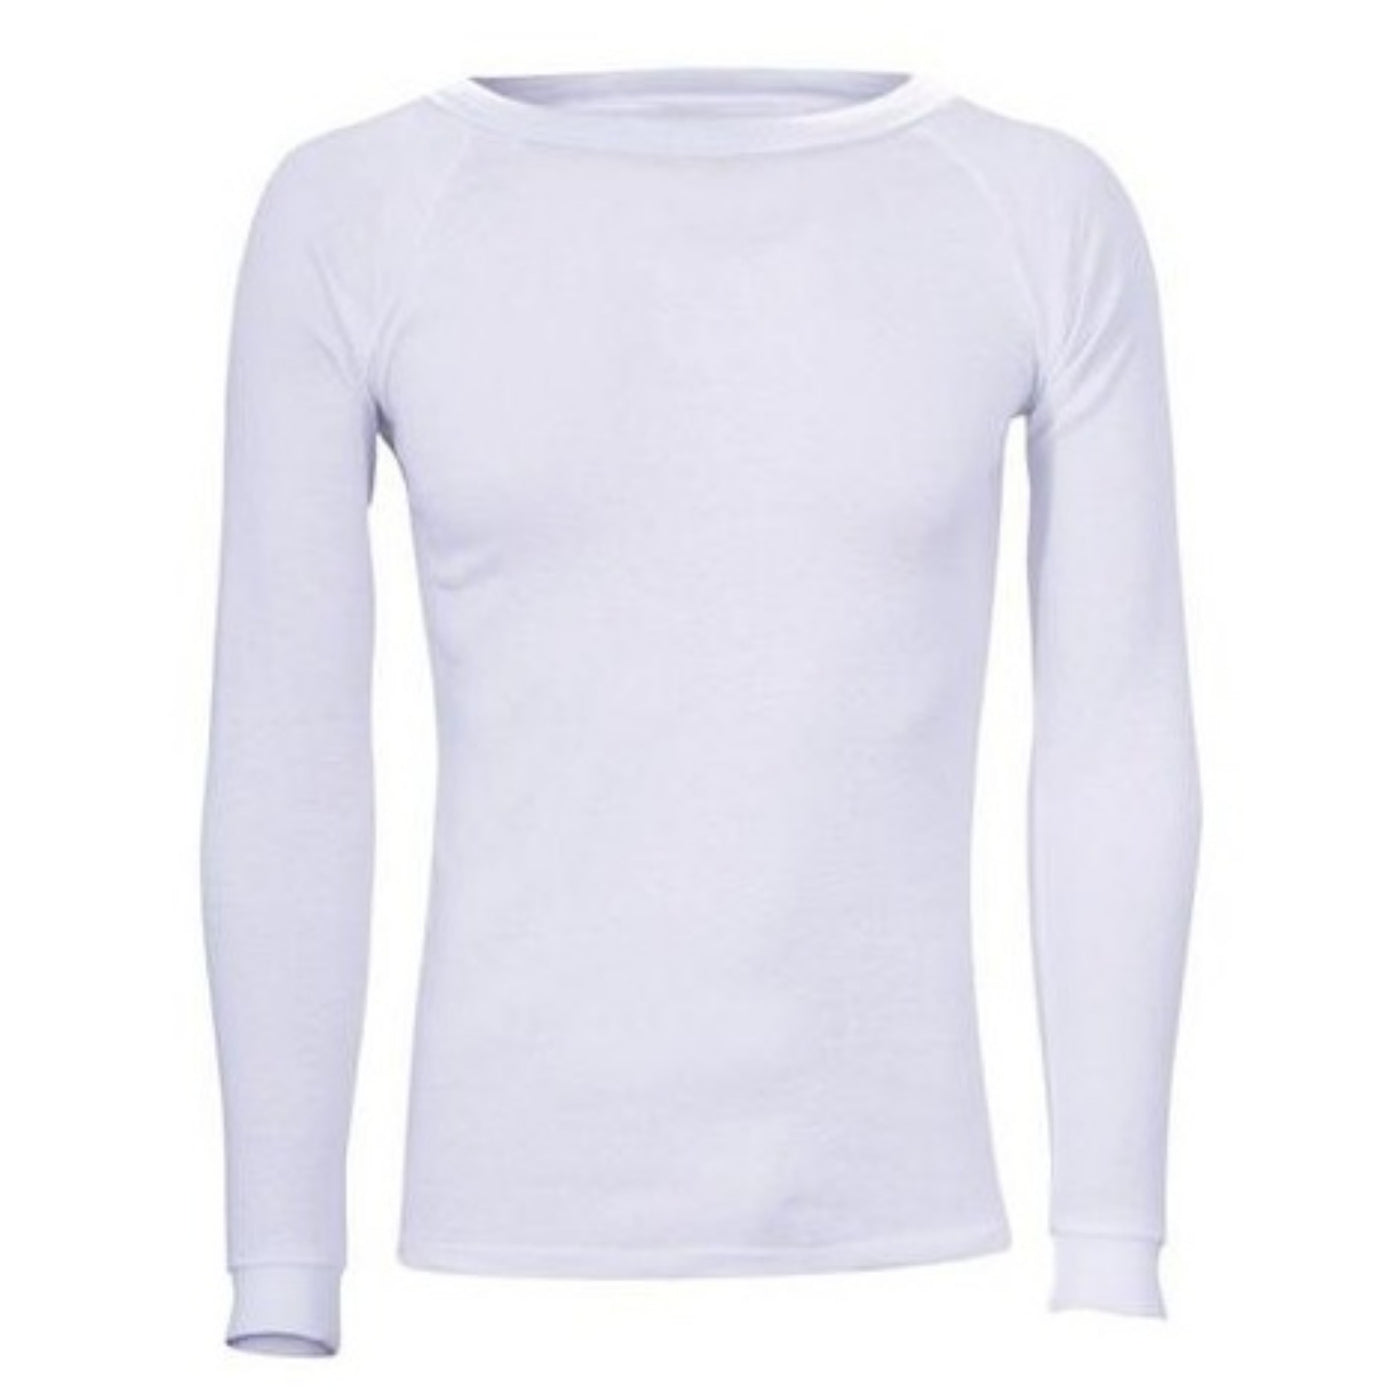 Sherpa Thermal Top - White